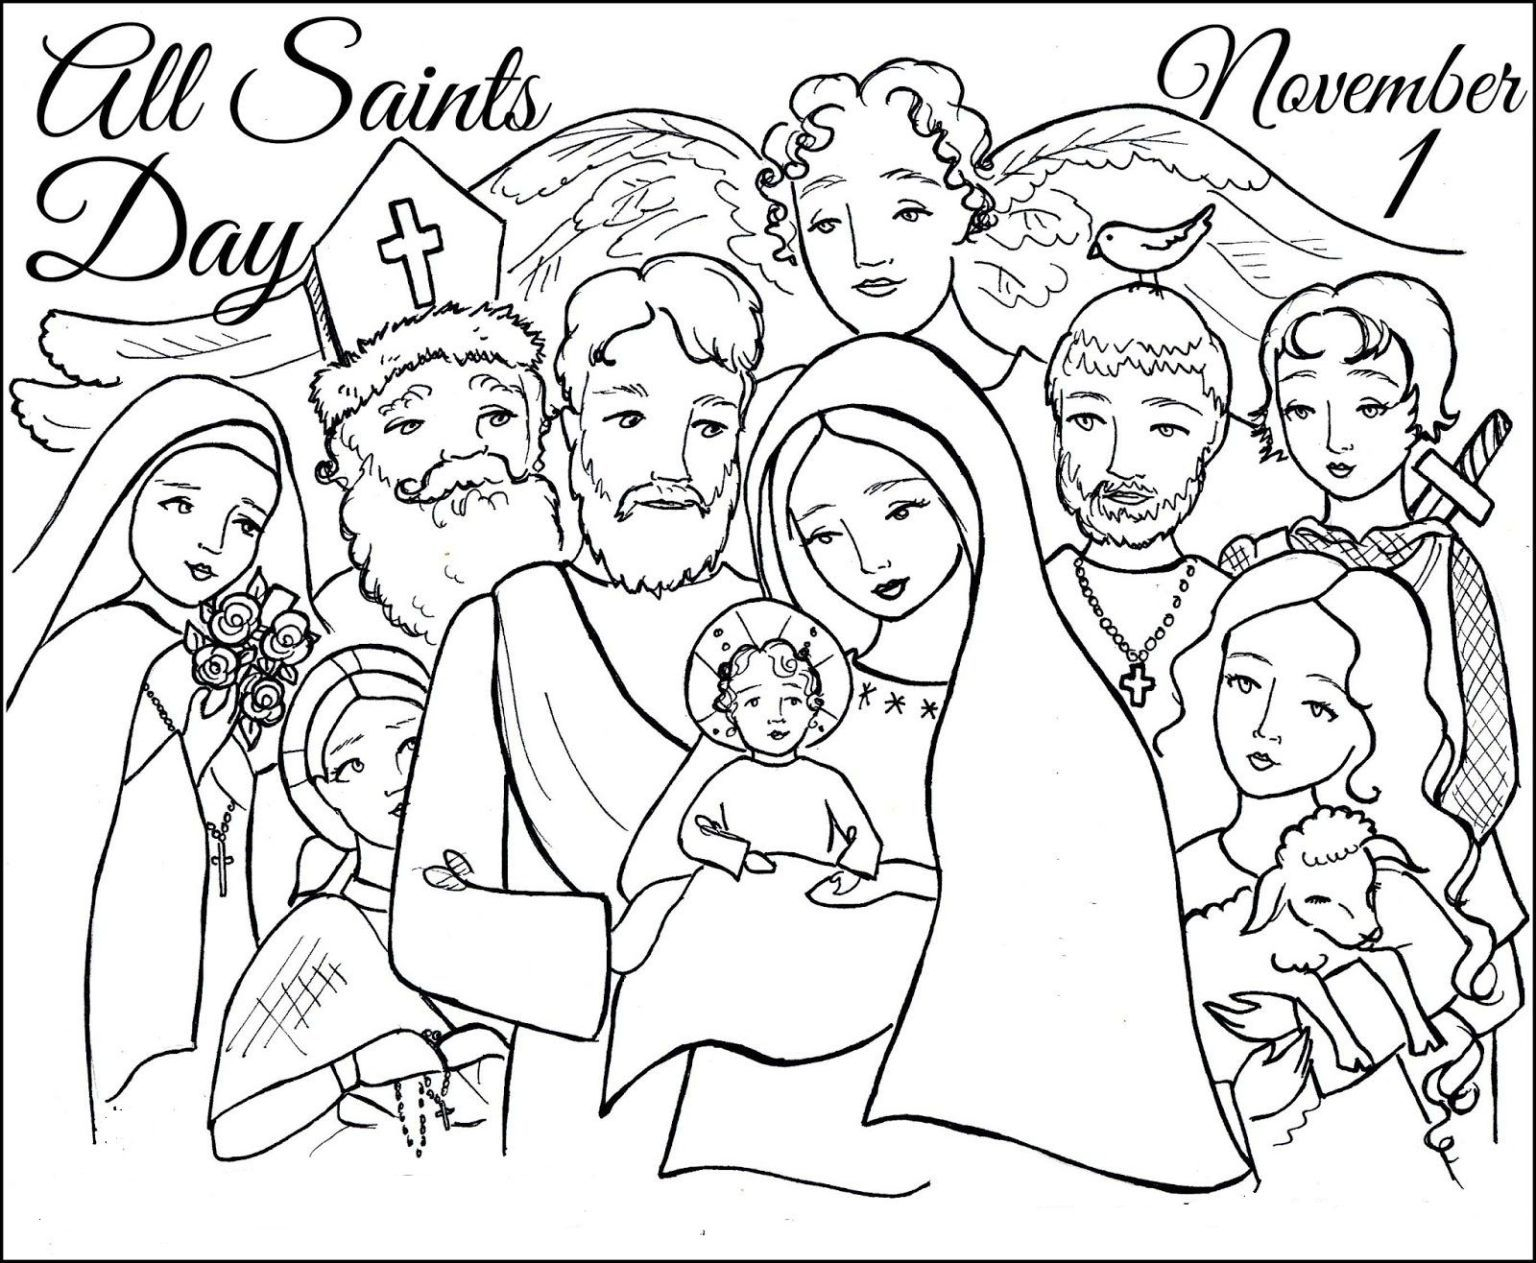 All Saints Day Coloring Page Activity Shelter In 2020 Saint 